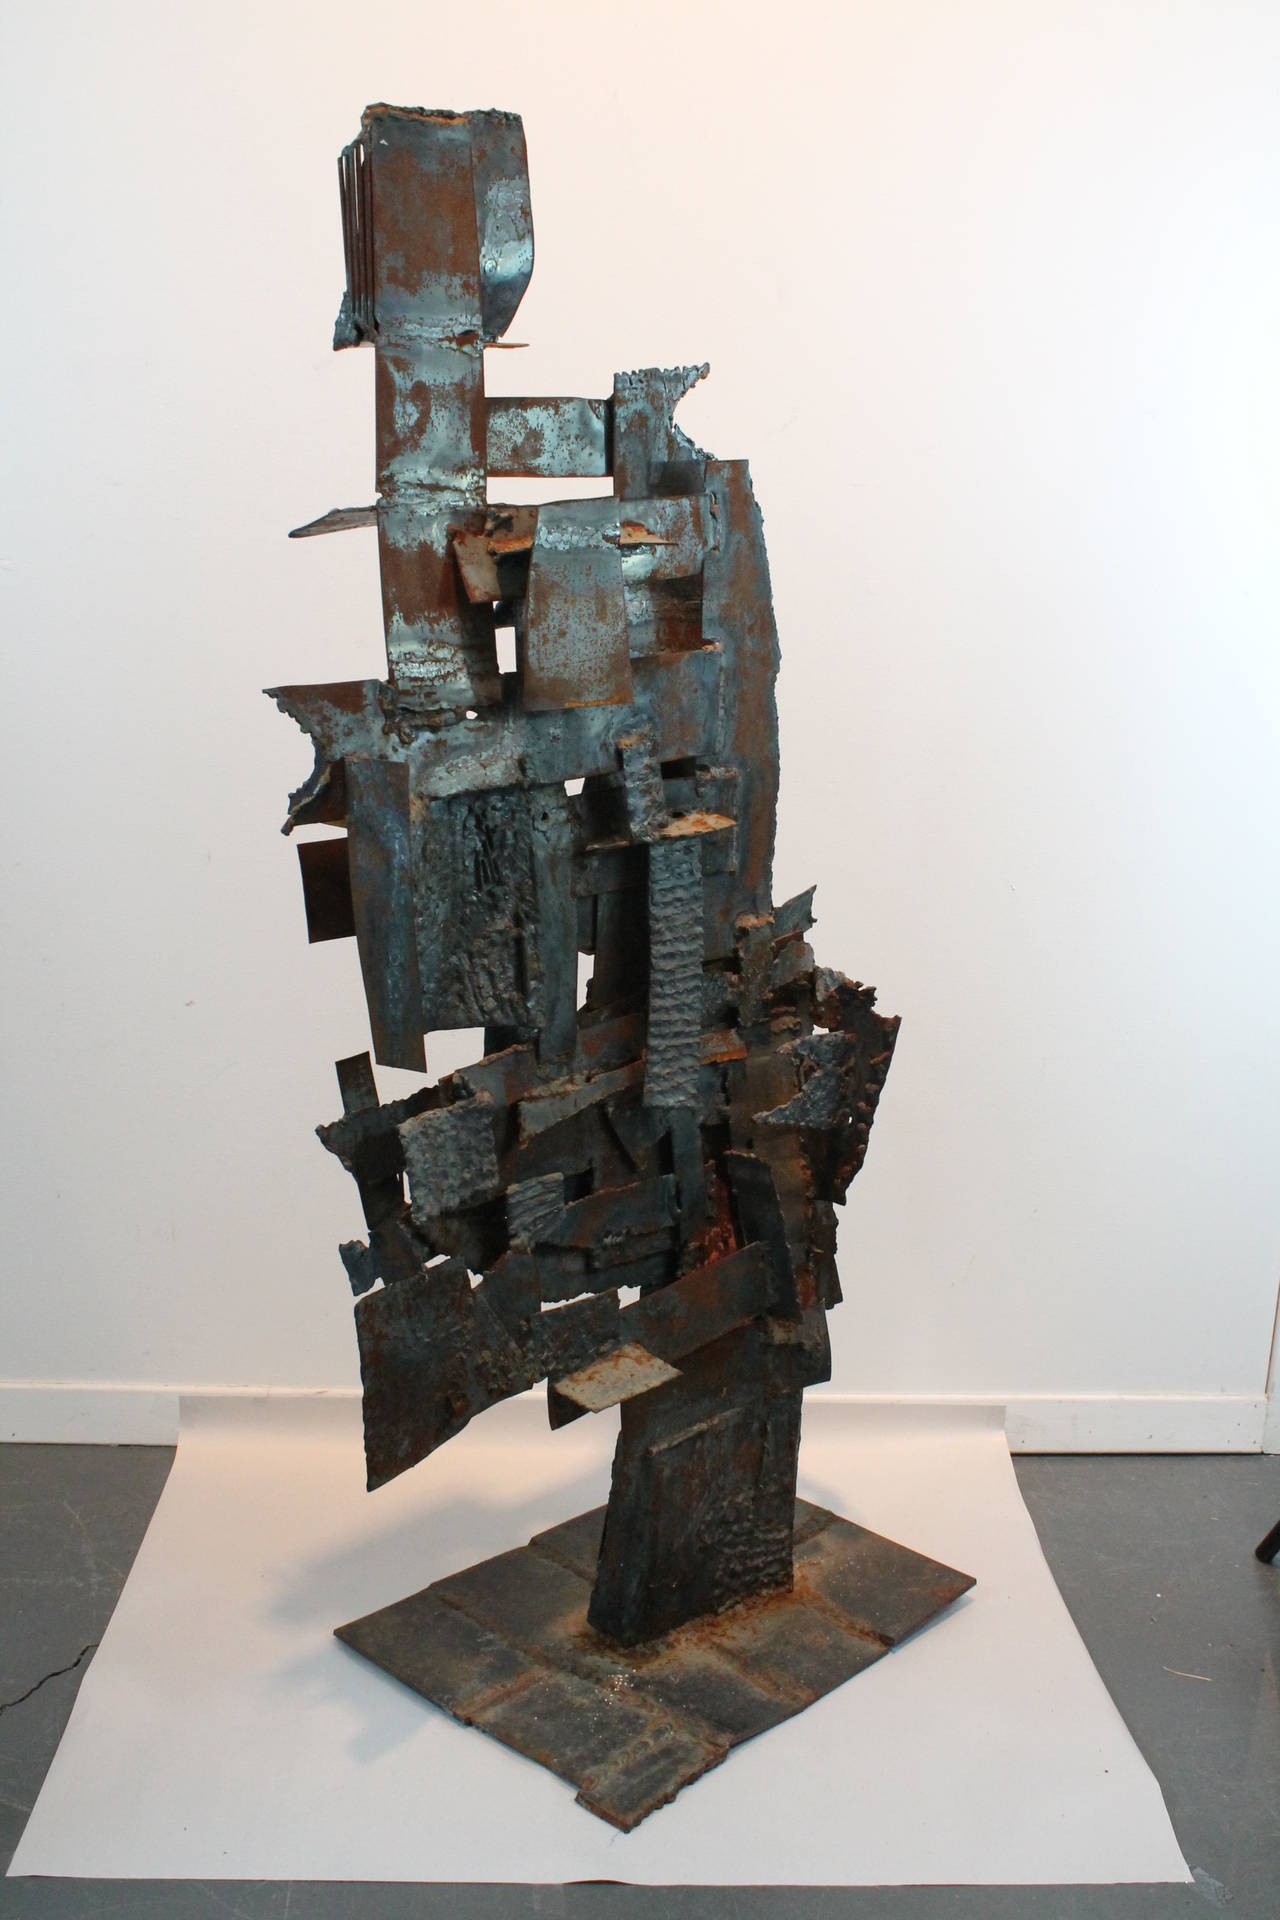 Strong dimension and scale in this torch cut steel 1960's Brutalist sculpture.
Great patina with various sections of oxidation. 
Would be great for exterior or interior usage.